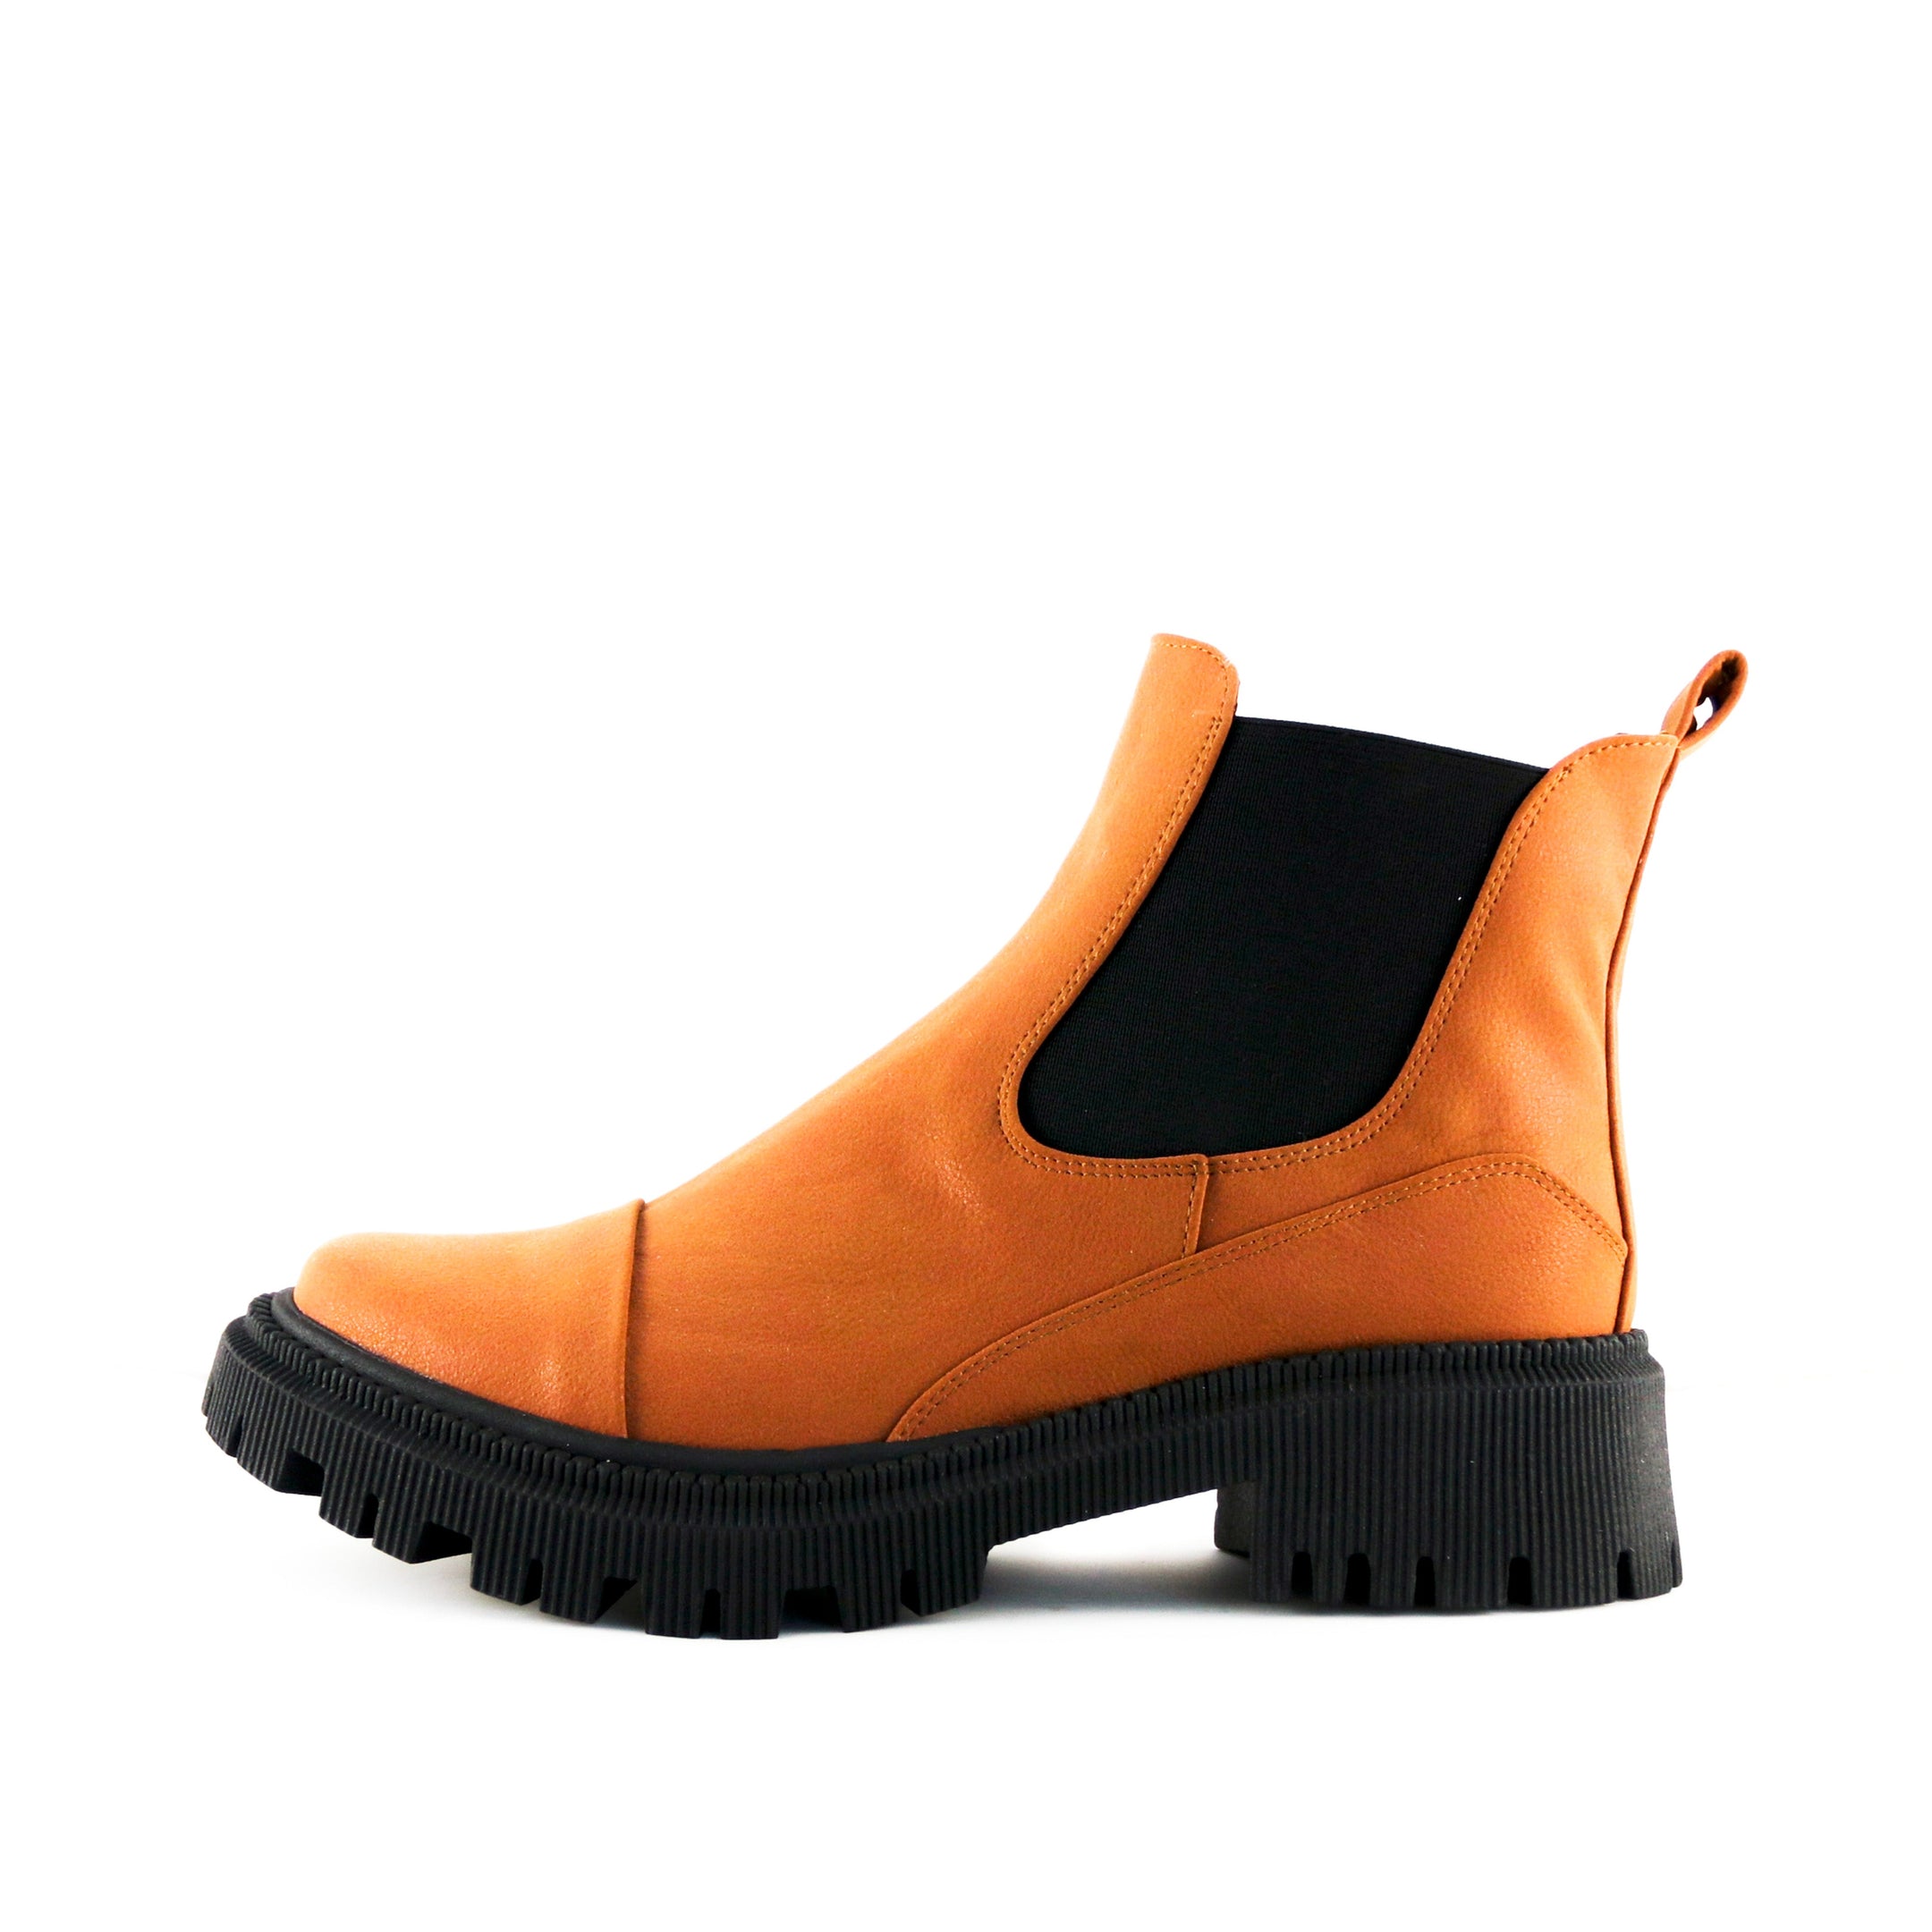 Buy Women's Twilight Chelsea Boots Camel by Nest Shoes